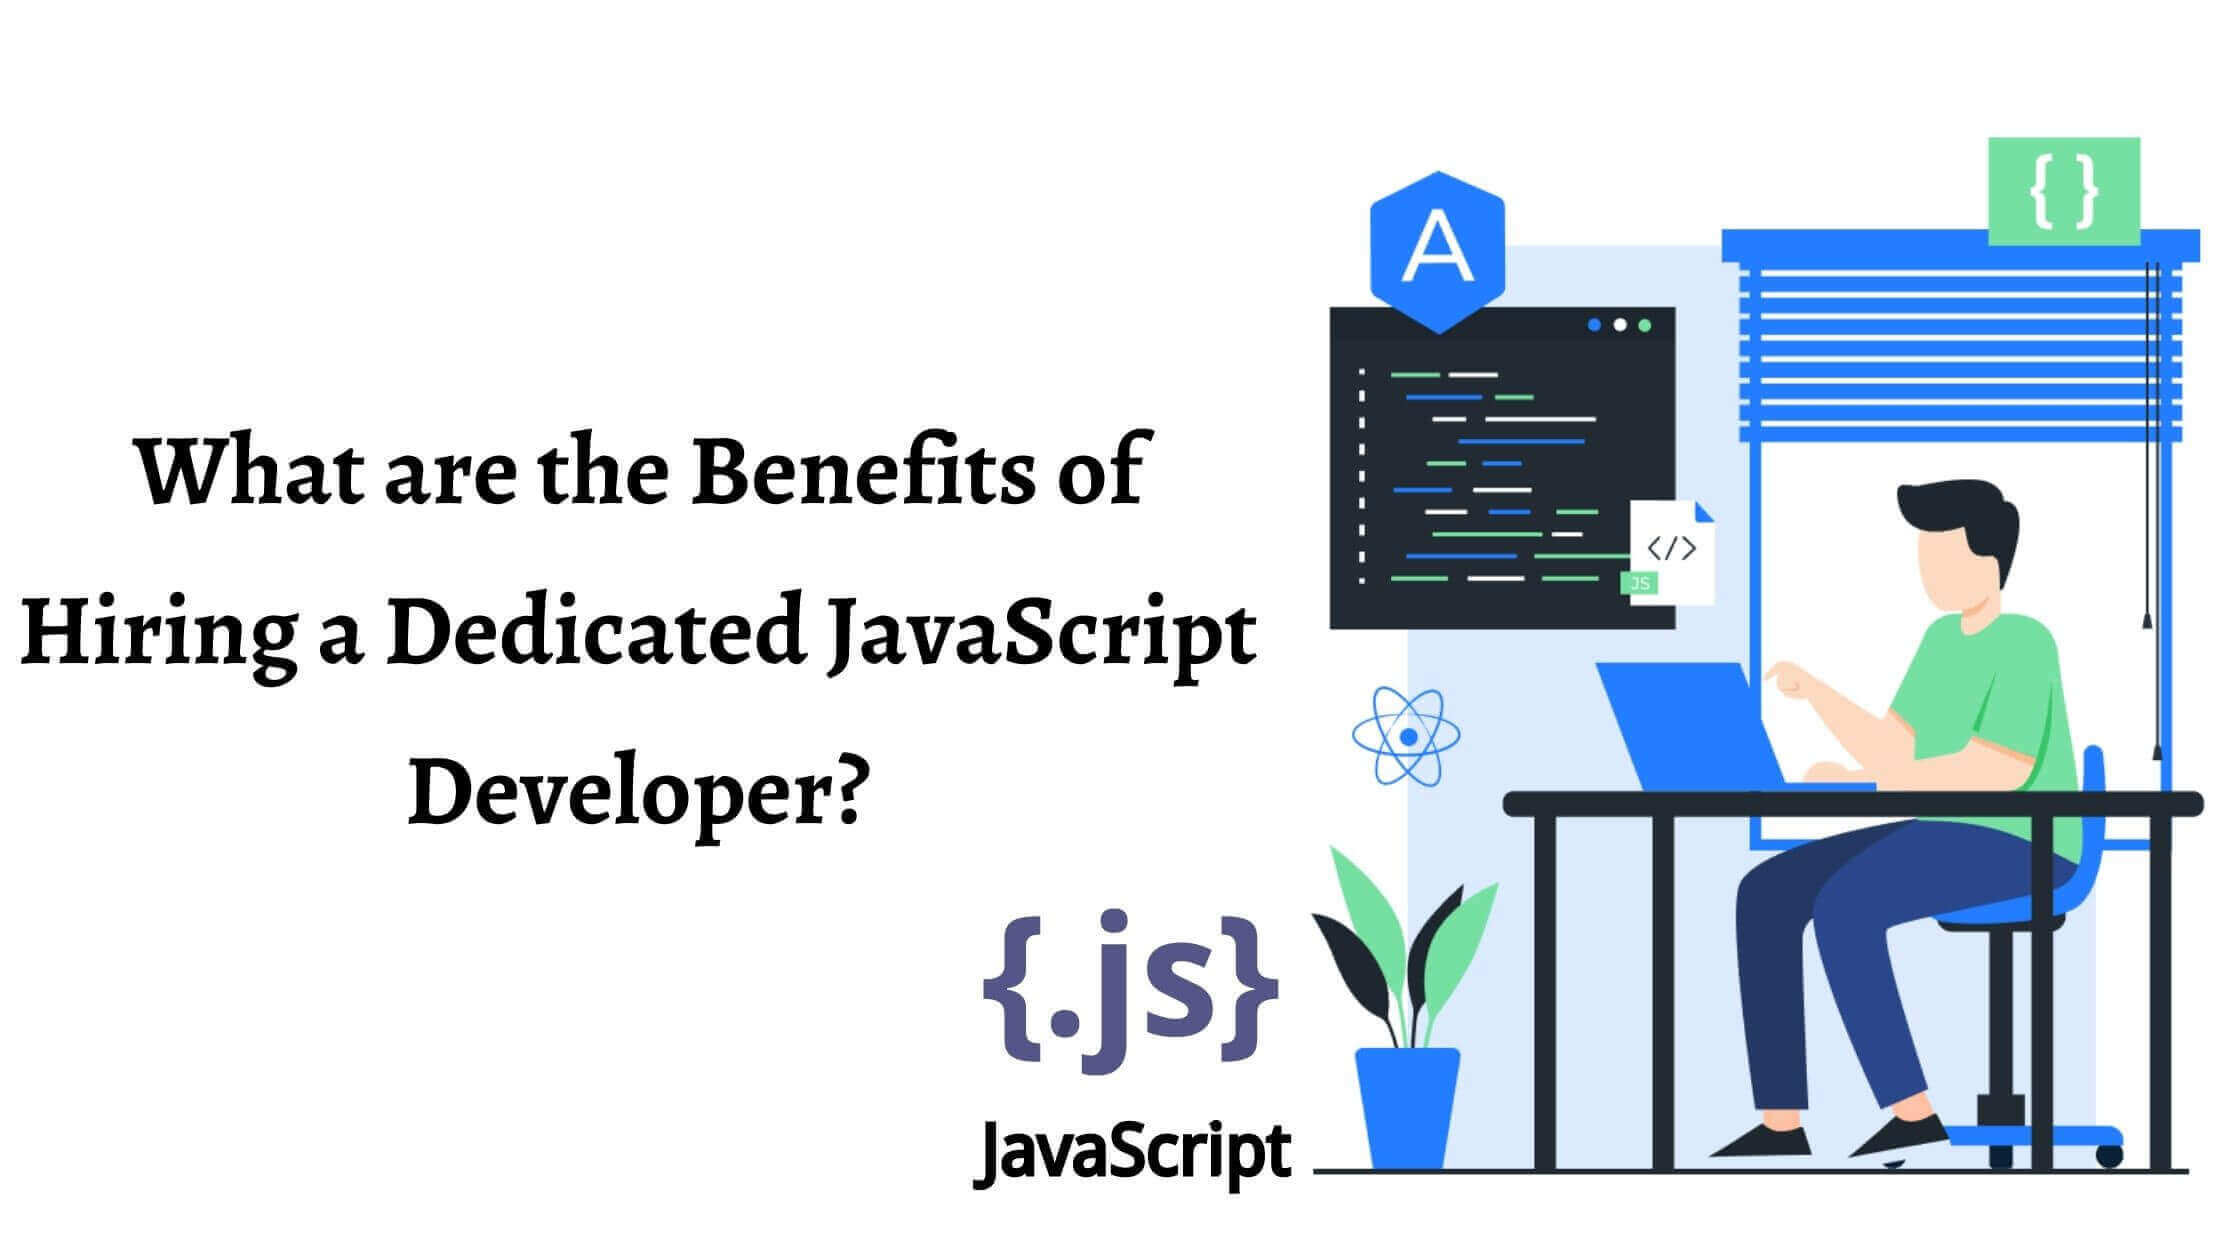 What are the Benefits of Hiring a Dedicated JavaScript Developer?